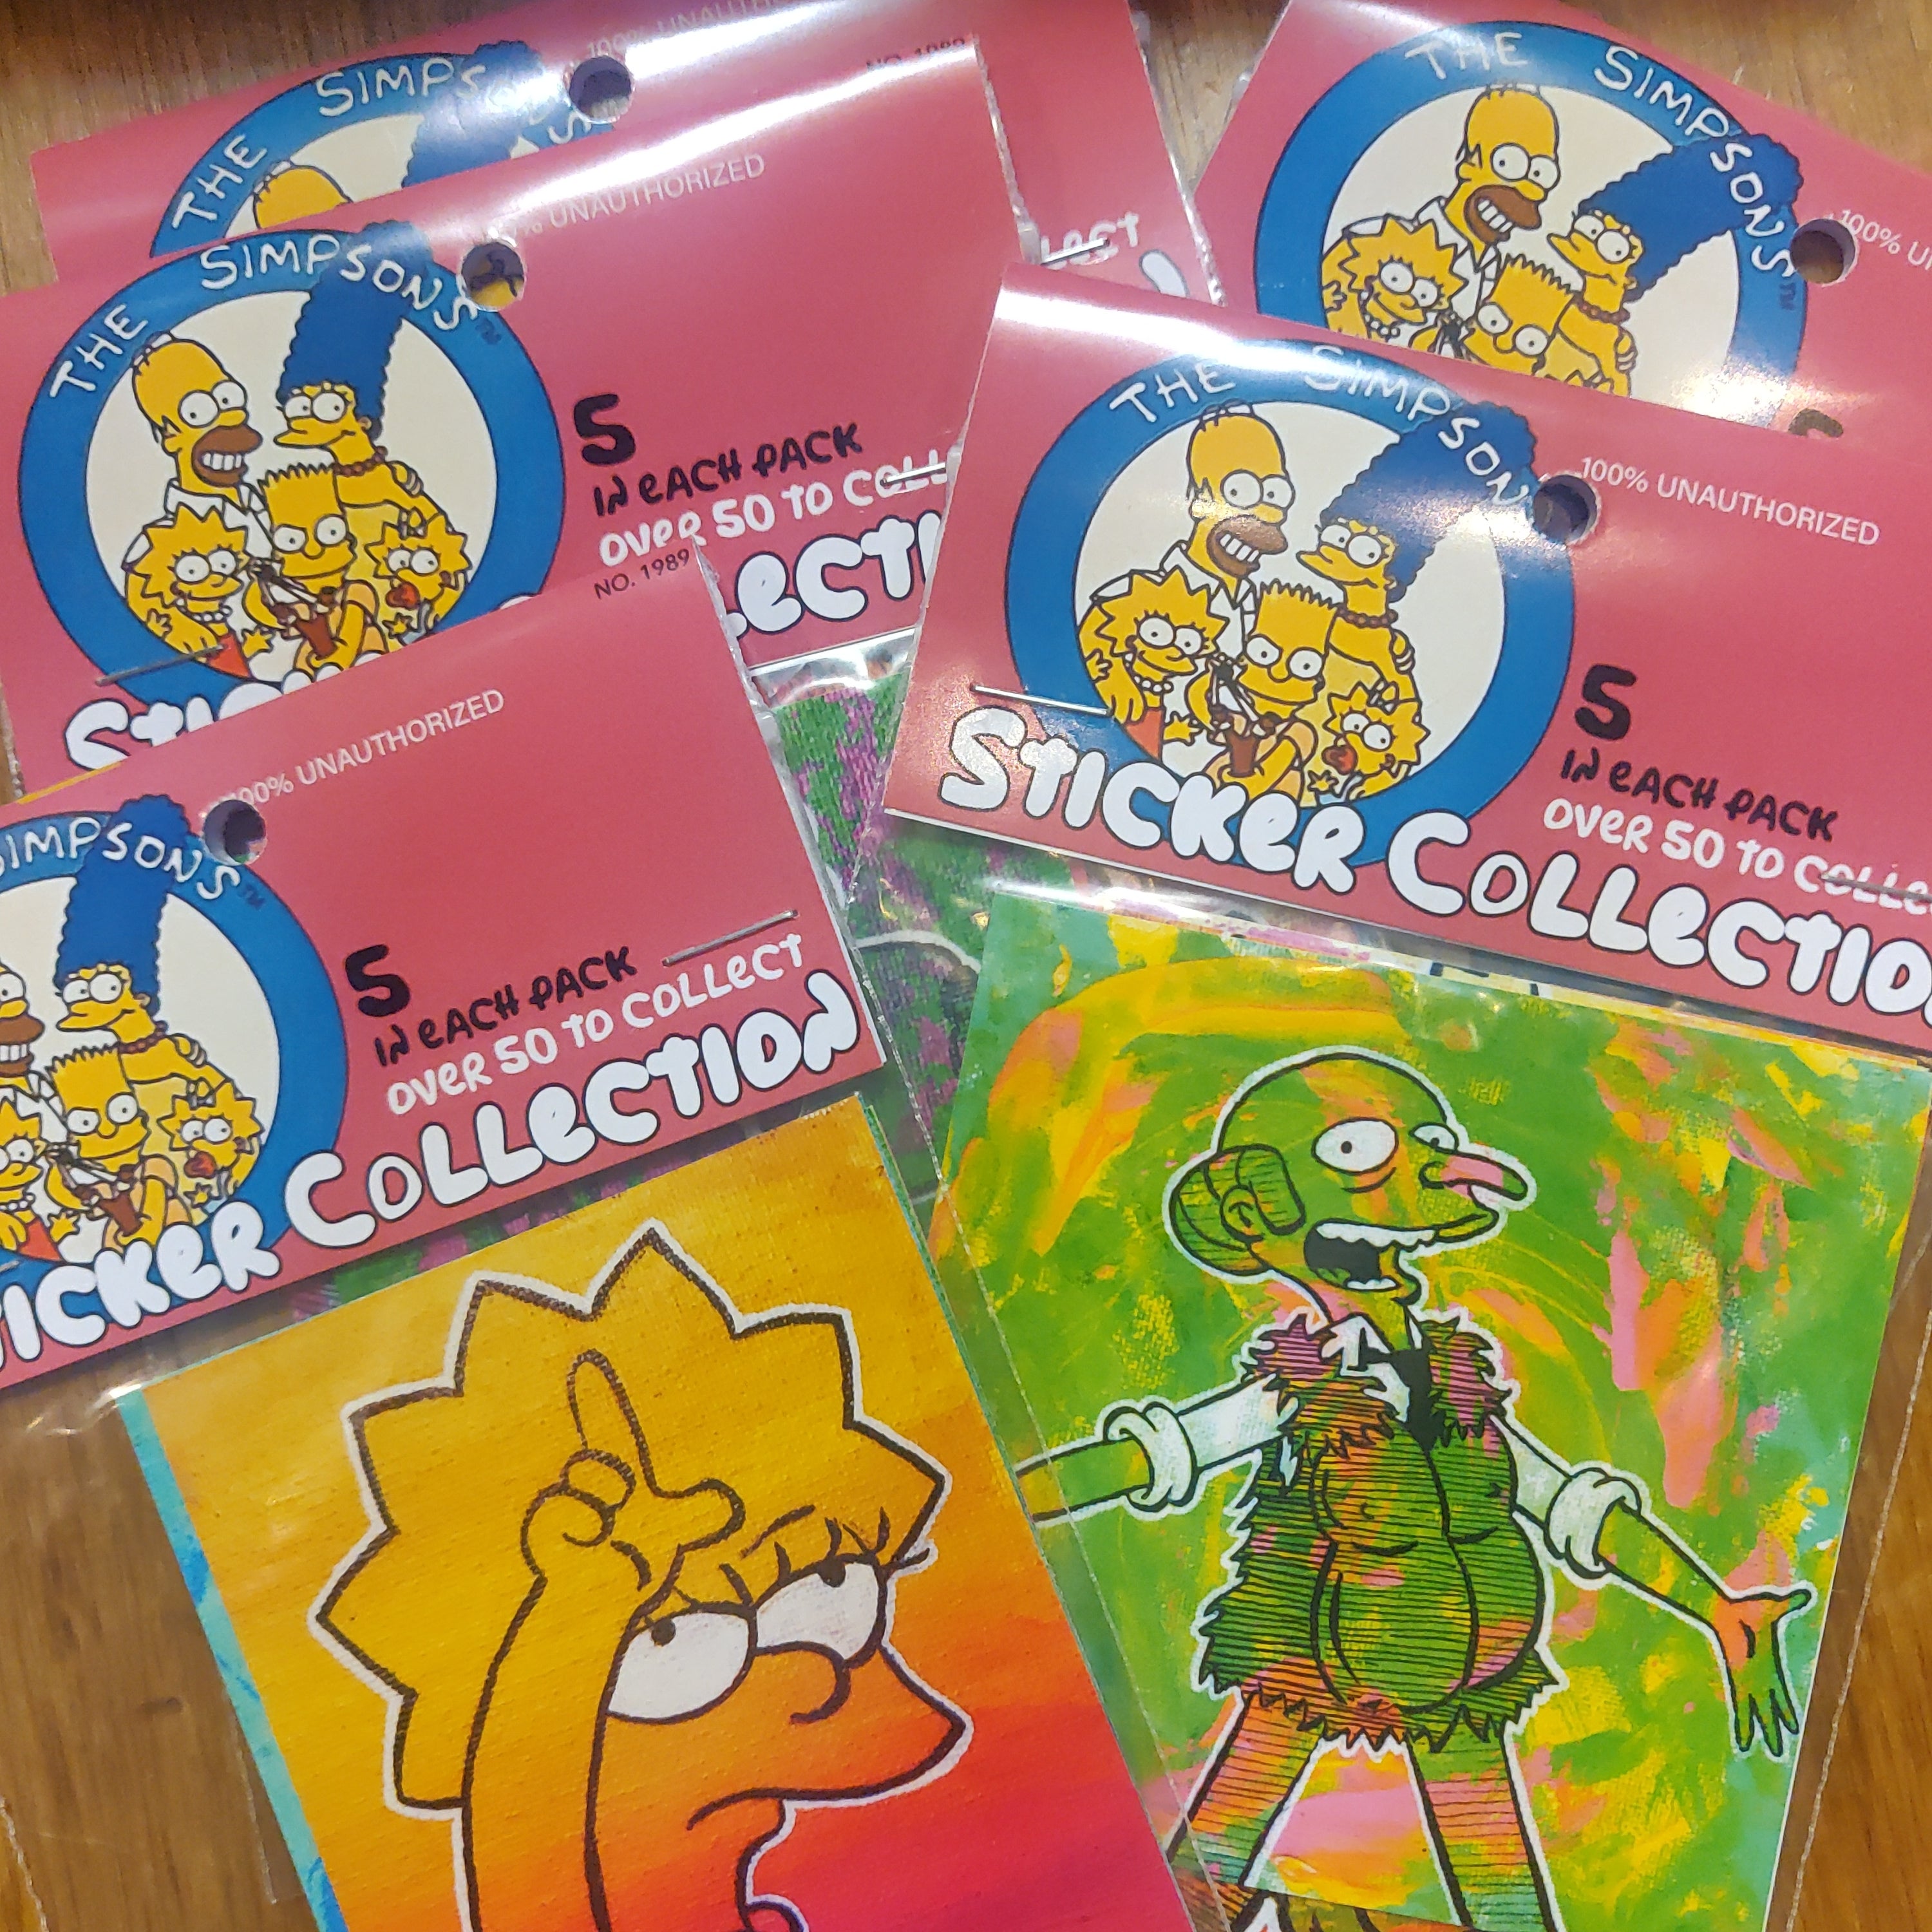 Simpsons 100% Unauthorized STICKER PACK